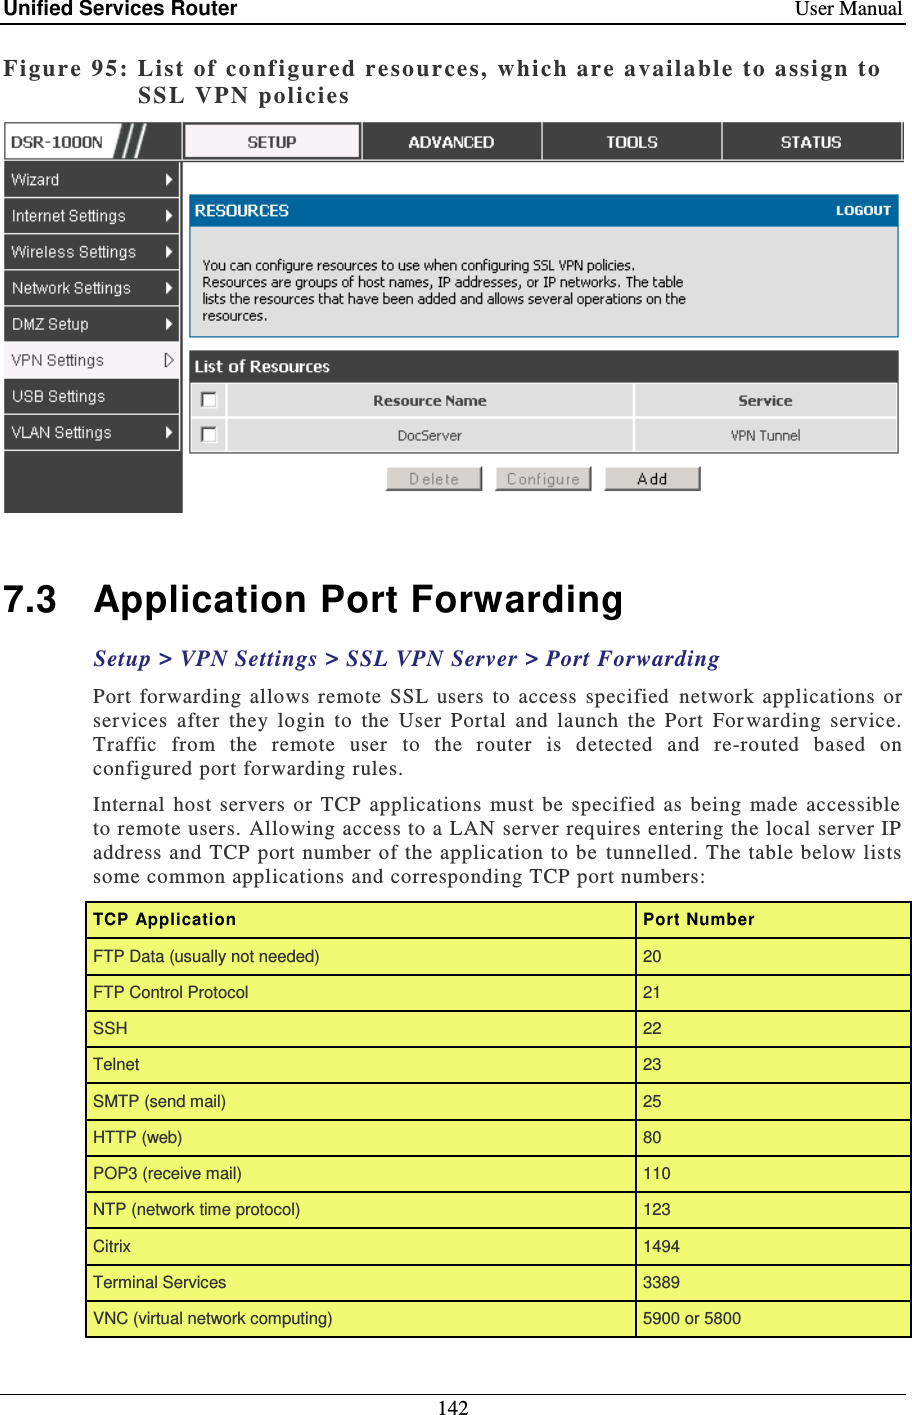 Unified Services Router    User Manual 142  Figure 95: List of conf igured resources, which are available to assign  to SSL VPN policies   7.3  Application Port Forwarding Setup &gt; VPN Settings &gt; SSL VPN Server &gt; Port Forwarding   Port  forwarding  allows  remote  SSL  users  to  access  specified  network  applications  or services  after  they  login  to  the  User  Portal  and  launch  the  Port  For warding  service. Traffic  from  the  remote  user  to  the  router  is  detected  and  re-routed  based  on configured port forwarding rules.  Internal  host  servers or  TCP  applications  must be  specified  as  being  made  accessible to remote users. Allowing access to a LAN server requires entering the local server IP address and TCP port number of the application to be  tunnelled. The table below lists some common applications and corresponding TCP port numbers:   TCP Application Port Number FTP Data (usually not needed)  20 FTP Control Protocol  21 SSH  22 Telnet  23 SMTP (send mail)  25 HTTP (web)  80 POP3 (receive mail)  110 NTP (network time protocol)  123 Citrix  1494 Terminal Services  3389 VNC (virtual network computing)  5900 or 5800 